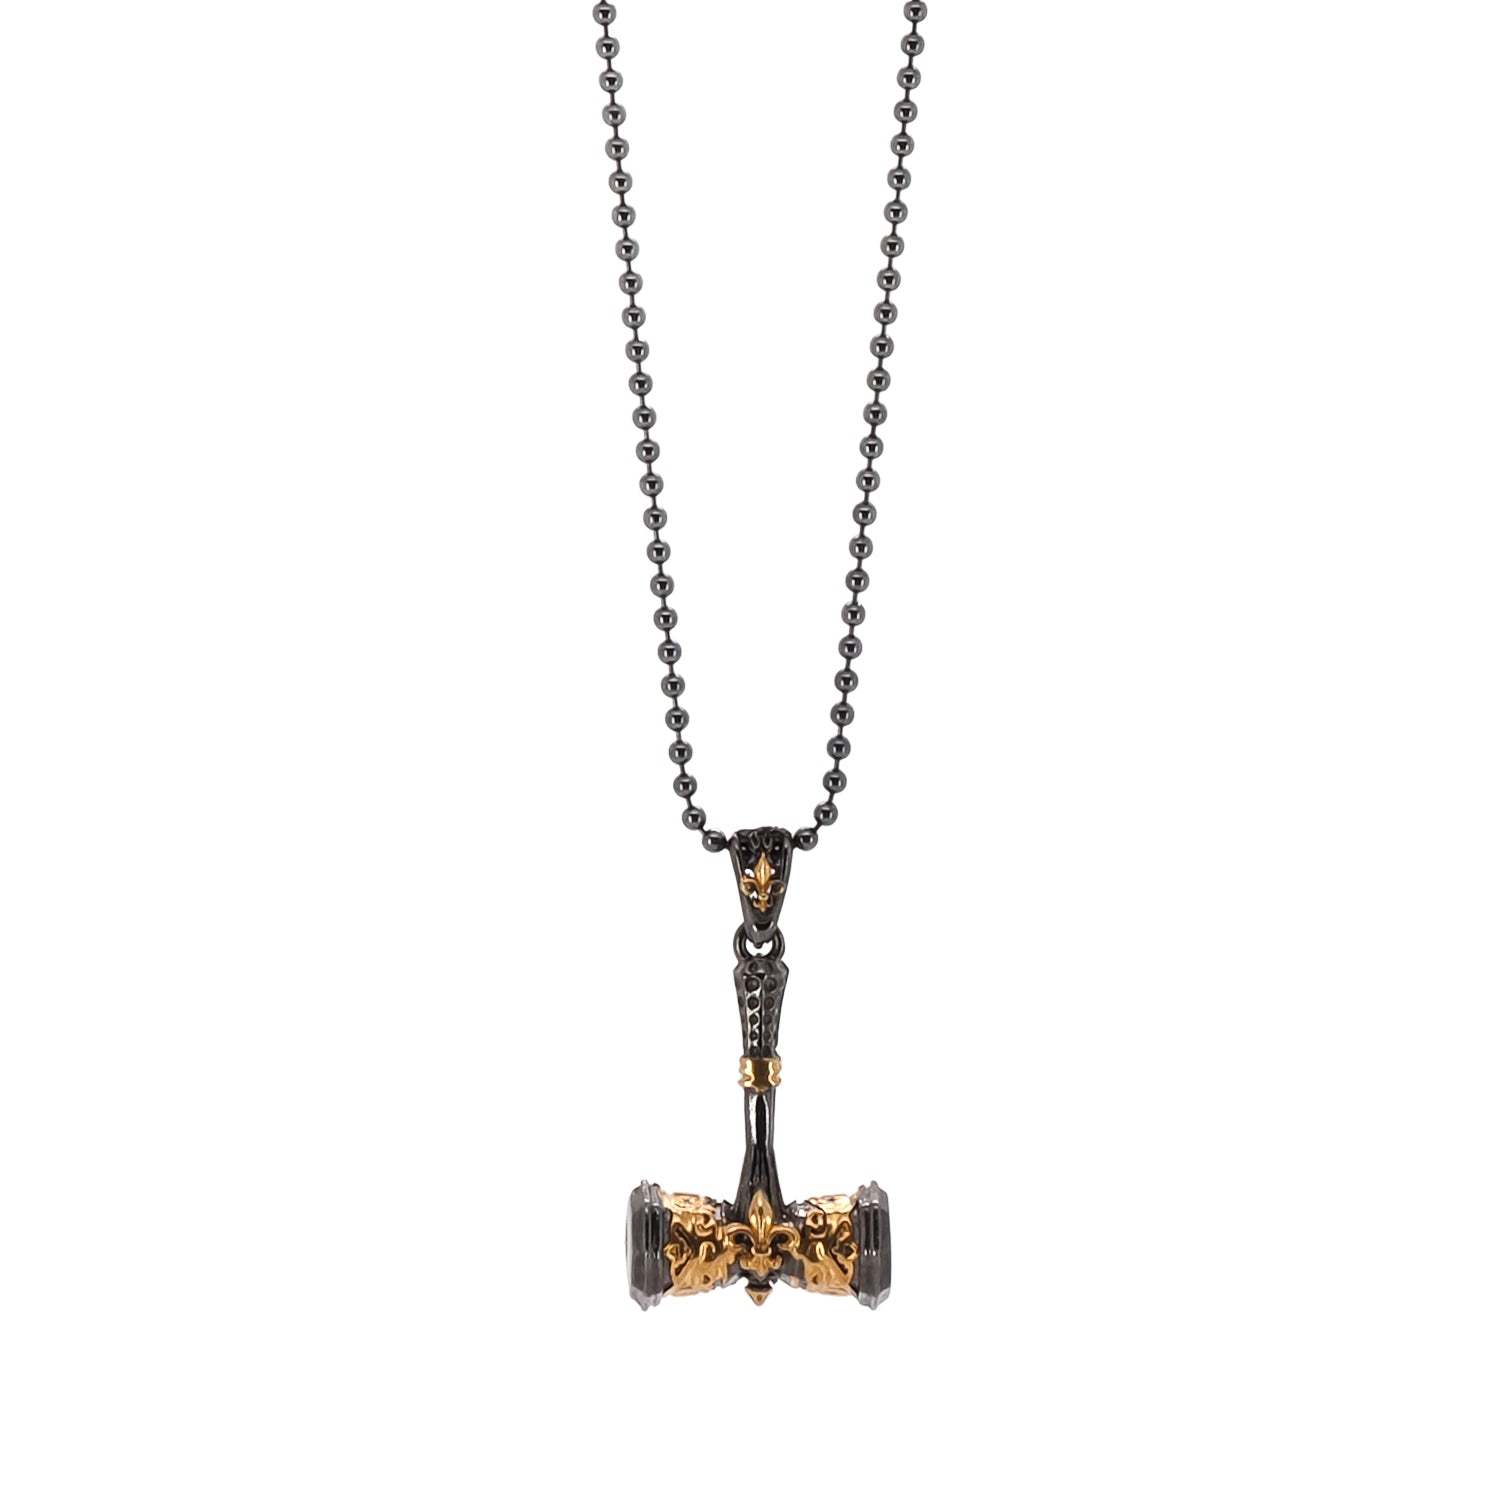 Stylish Hammer Pendant Necklace for men, featuring a sterling silver chain and a gold-plated pendant with a fleur de lis design